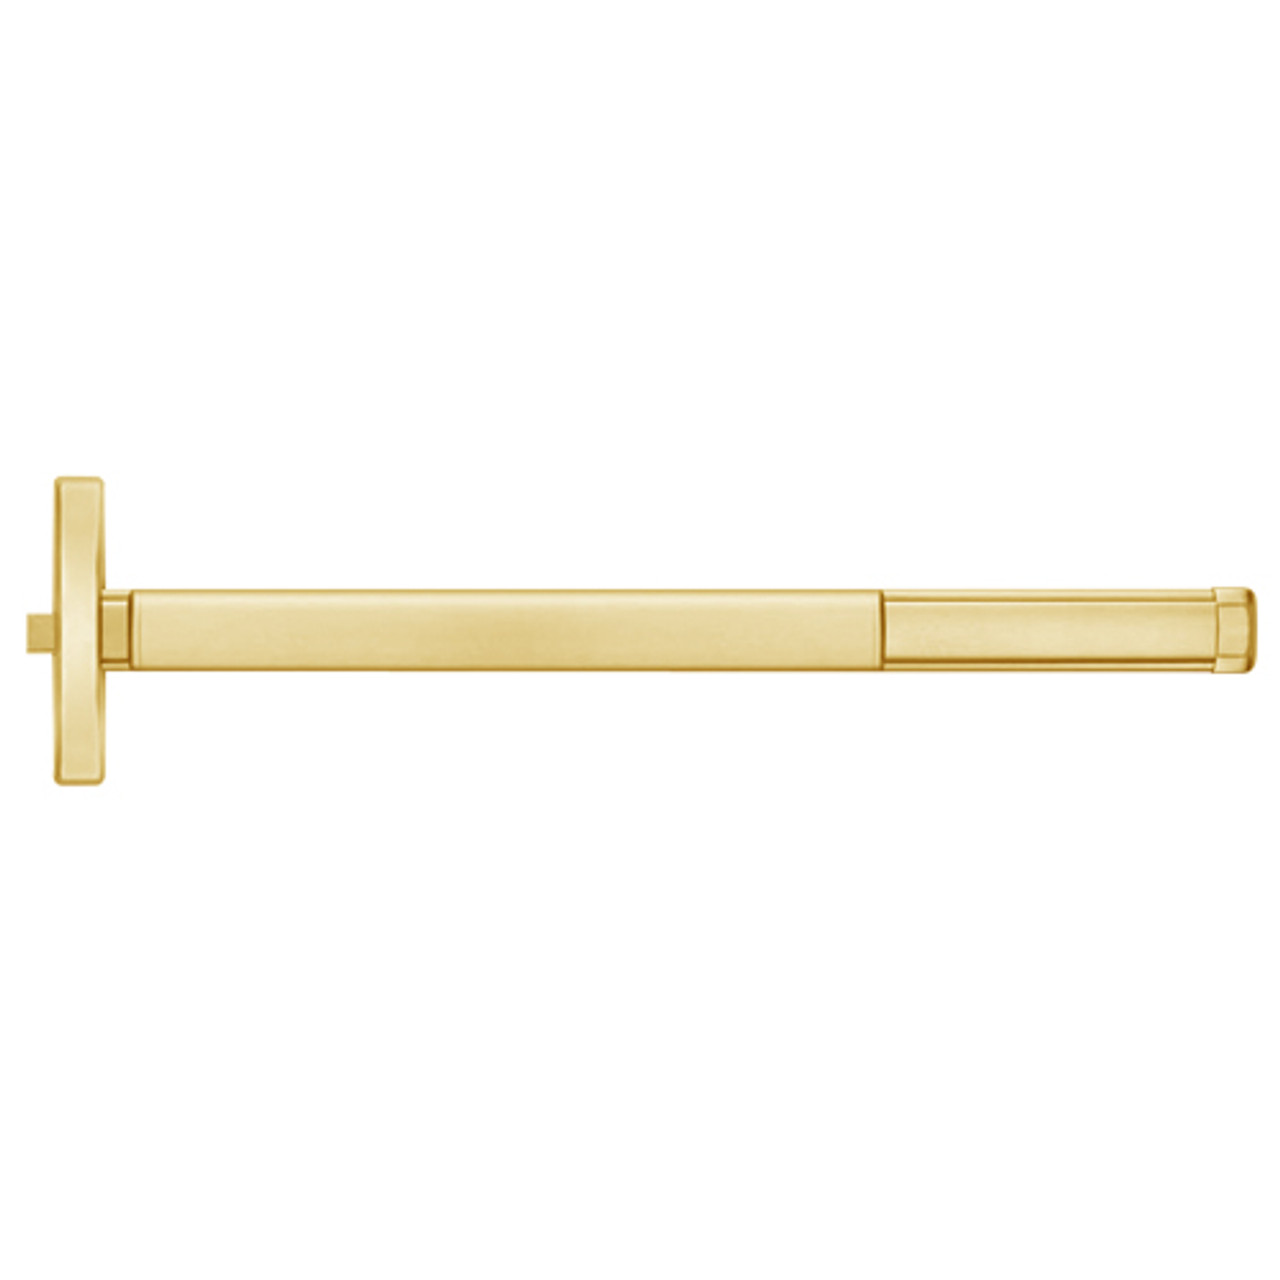 2401-605-36 PHI 2400 Series Non Fire Rated Apex Rim Exit Device Prepped for Cover Plate in Bright Brass Finish